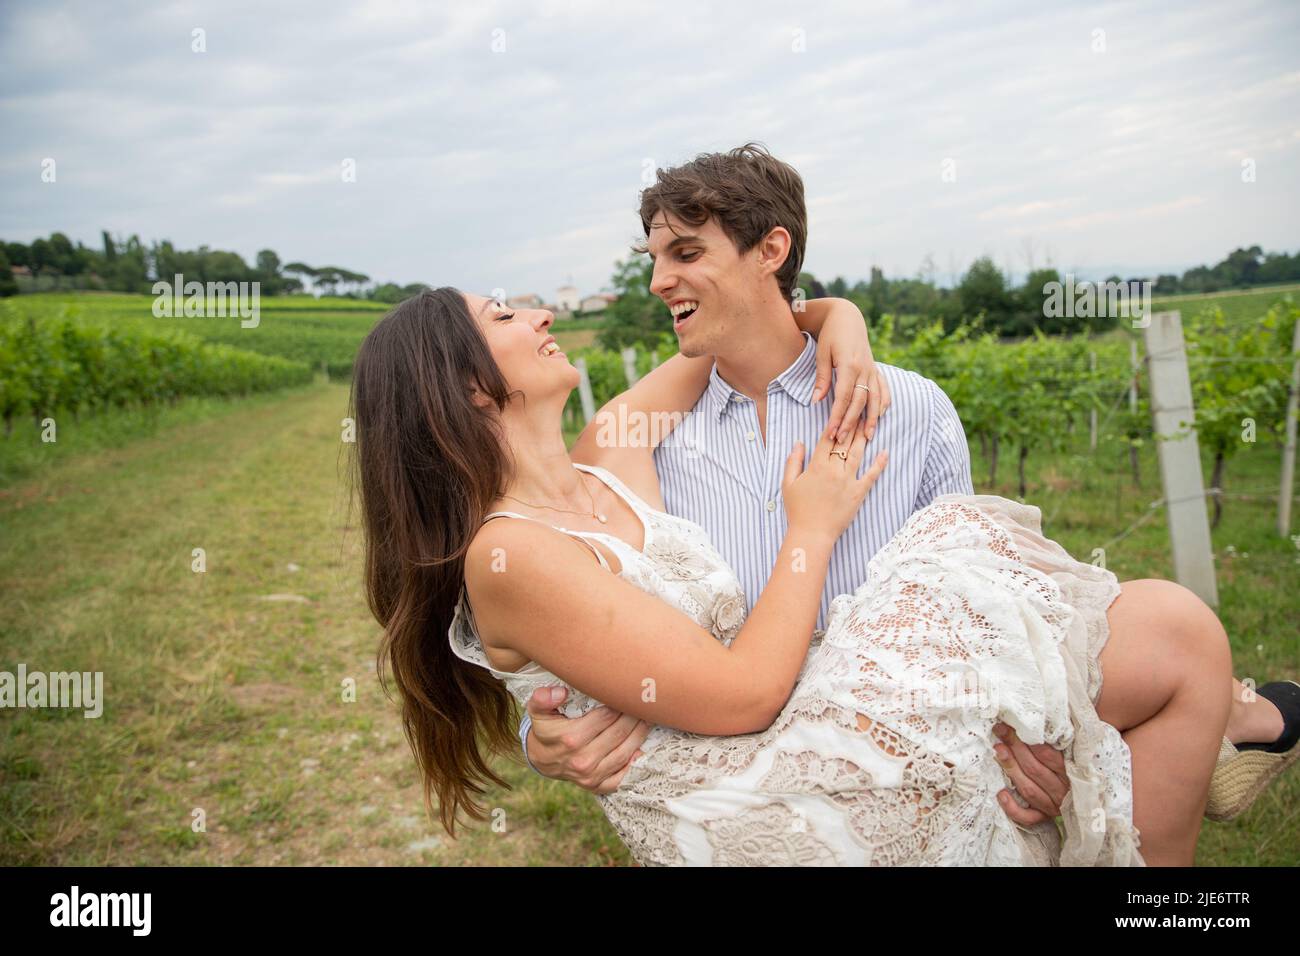 Girl in love gets picked up by her love in an outdoor field. Love concept. Stock Photo